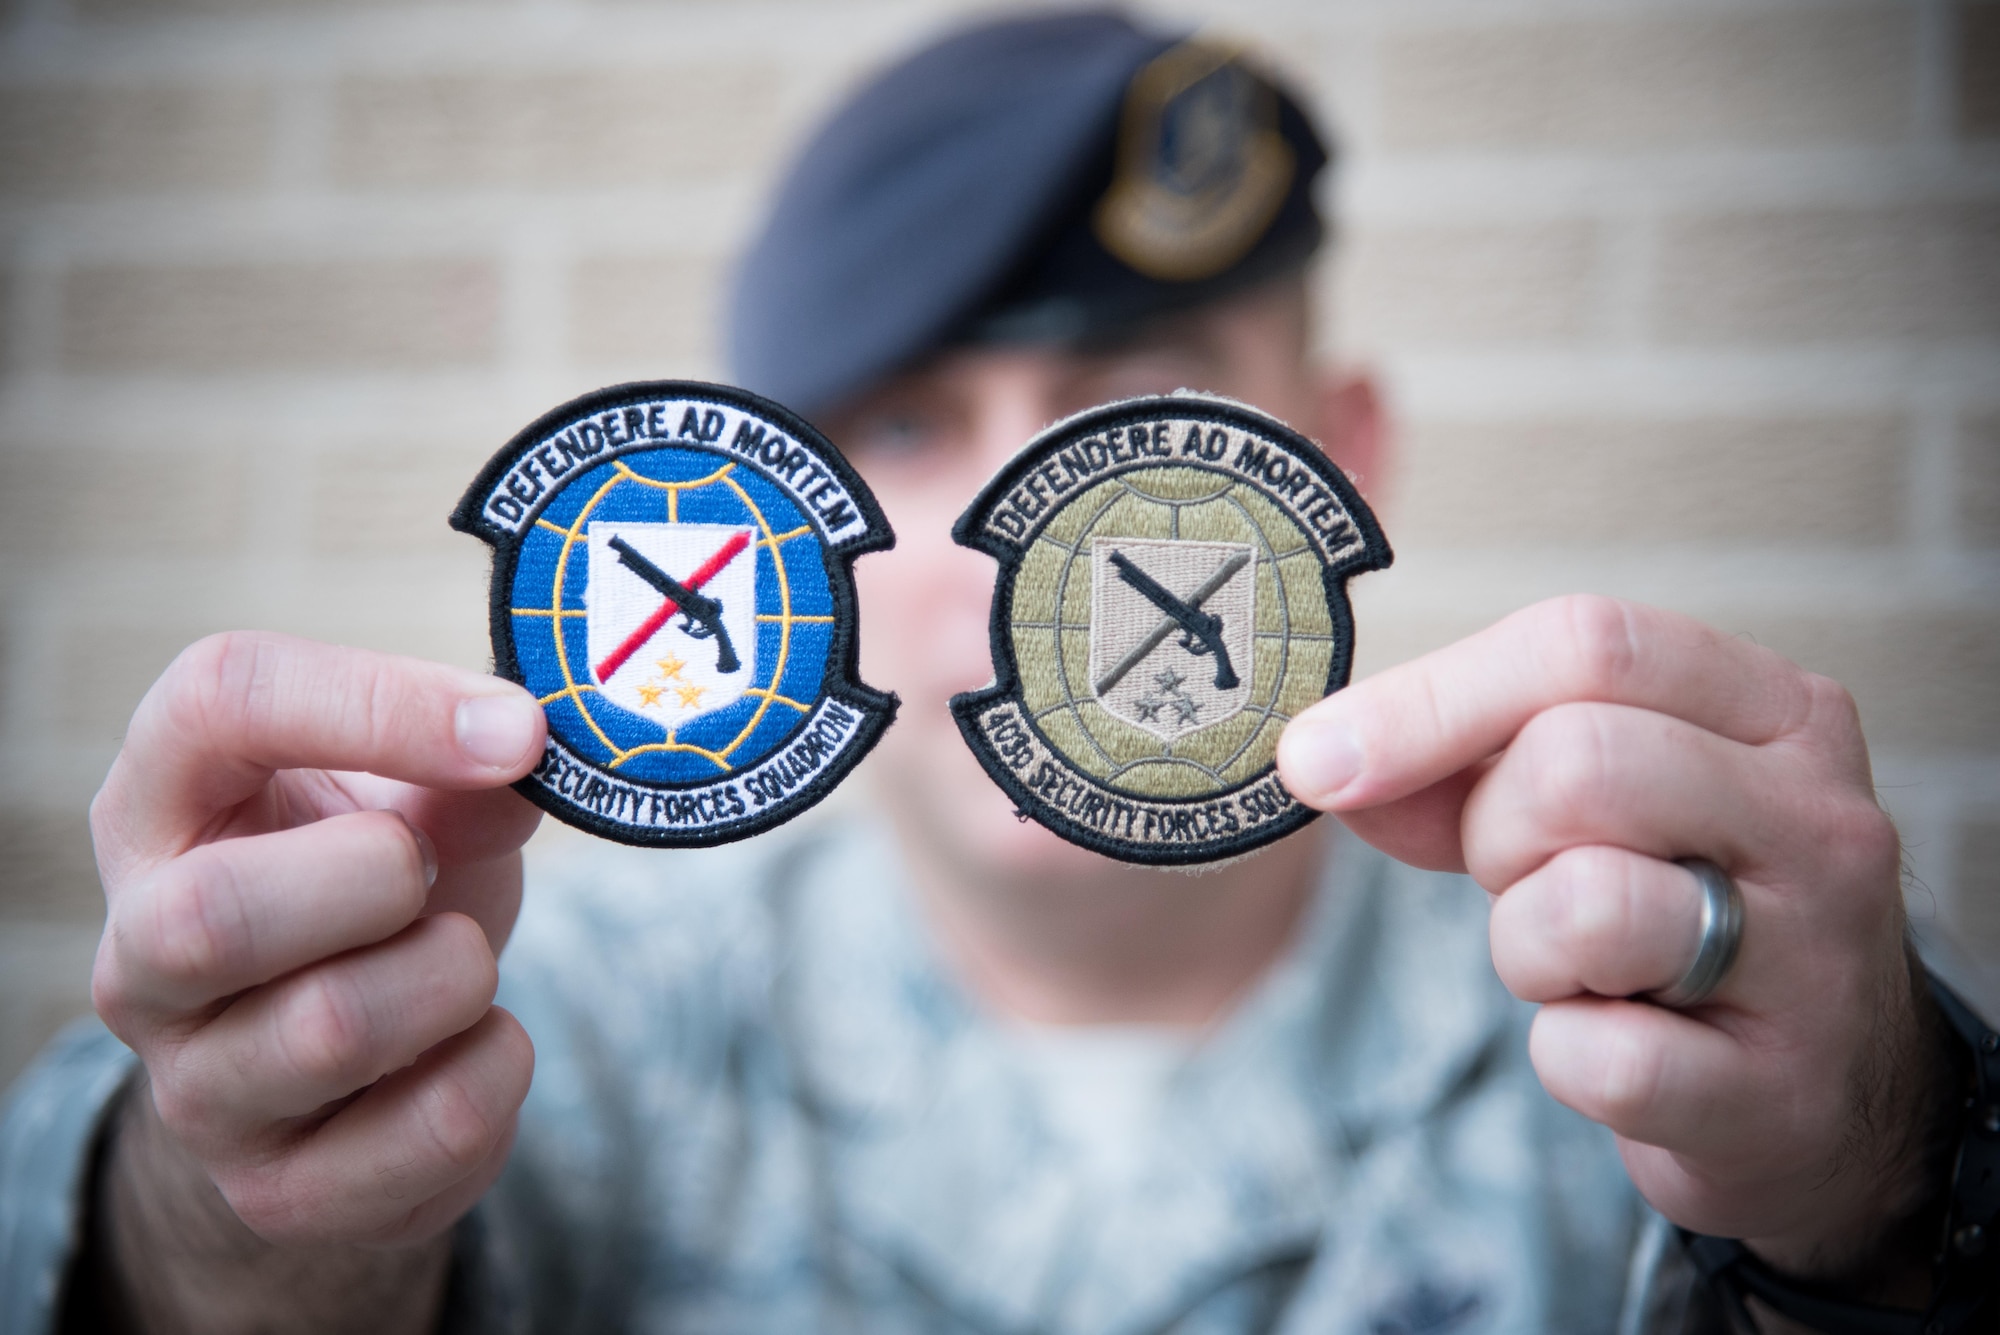 Master Sgt. Lucas Applewhite, 403rd Security Forces Squadron action officer, displays the new 403rd SFS unit patch Nov. 7, 2017 at Keesler Air Force Base, Mississippi. (U.S. Air Force photo by Staff Sgt. Heather Heiney)